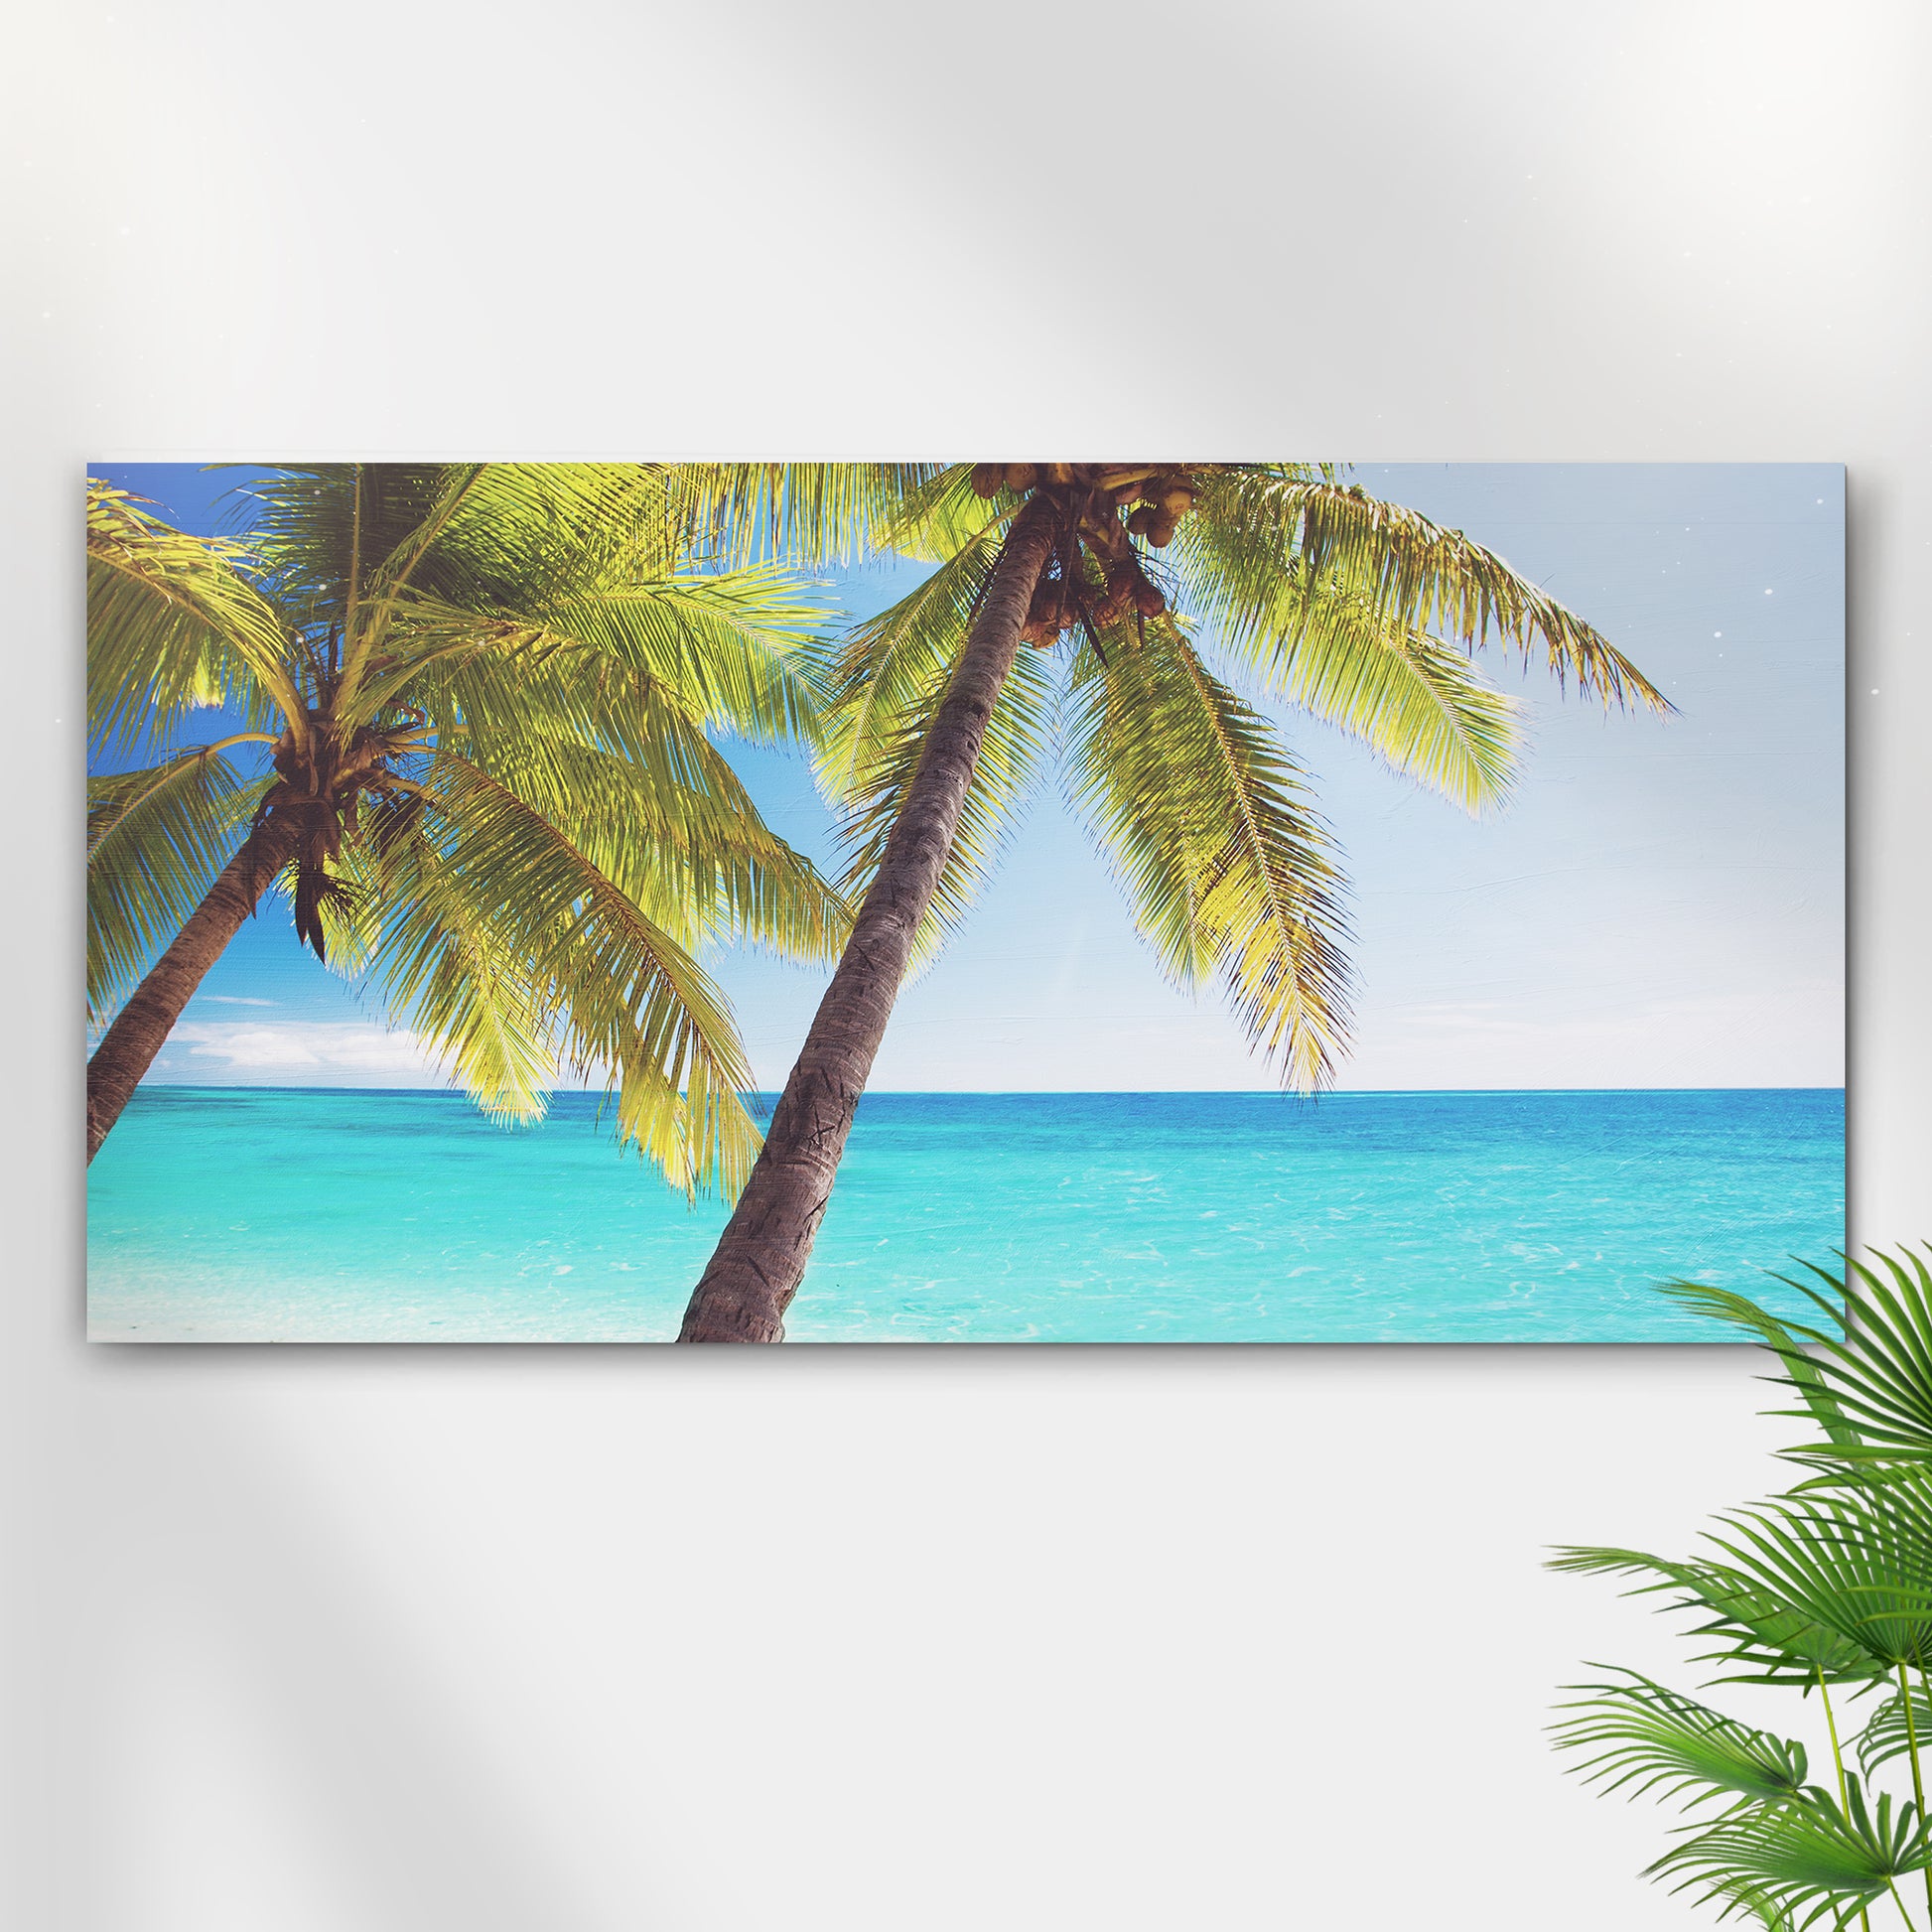 Coconut Trees By The Beach Canvas Wall Art - Image by Tailored Canvases